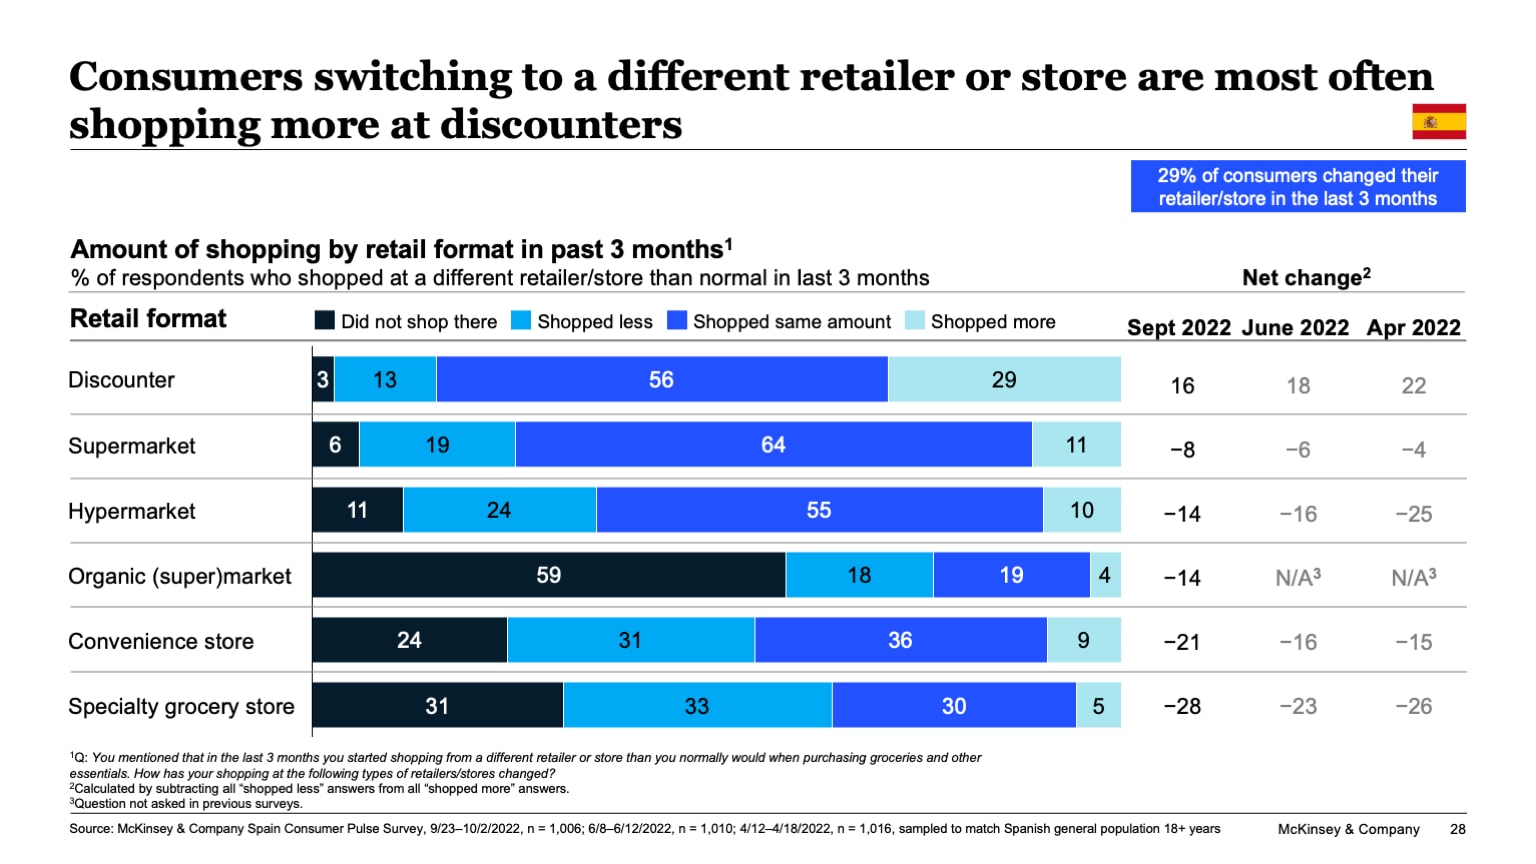 Consumers switching to a different retailer or store are most often shopping more at discounters